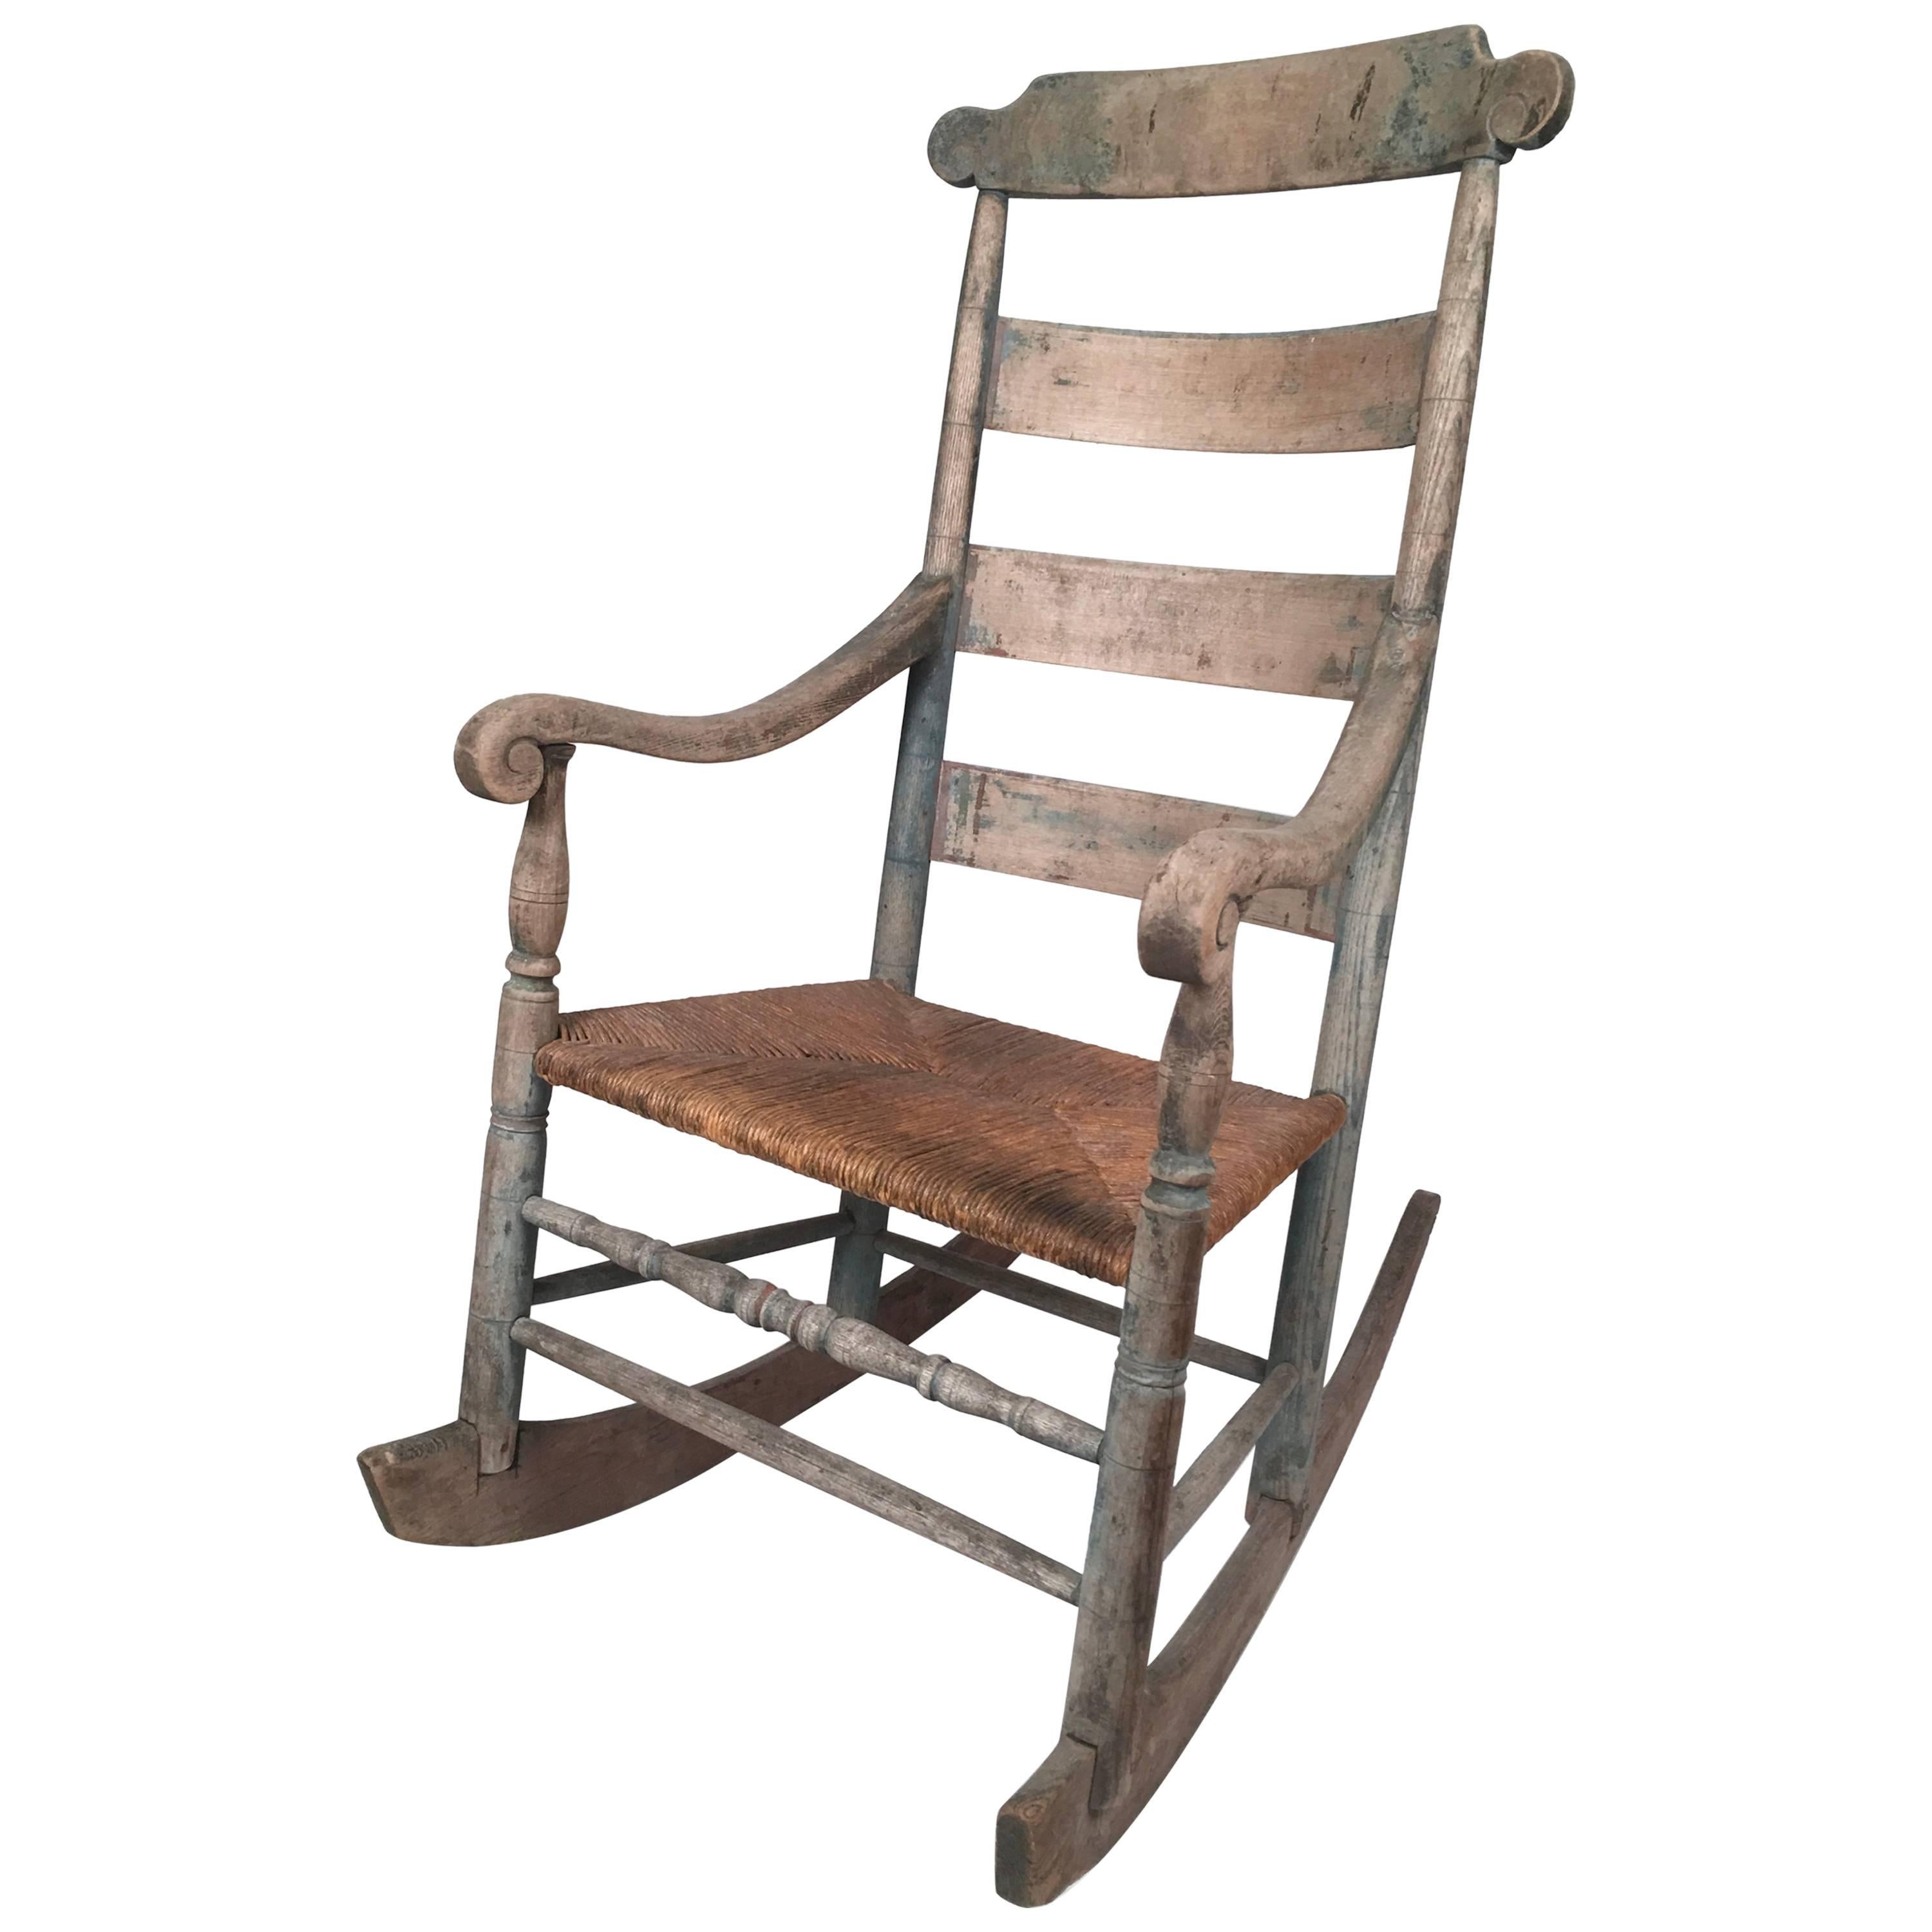 19th Century Country Rocking Chair with Old Blue Painted Surface